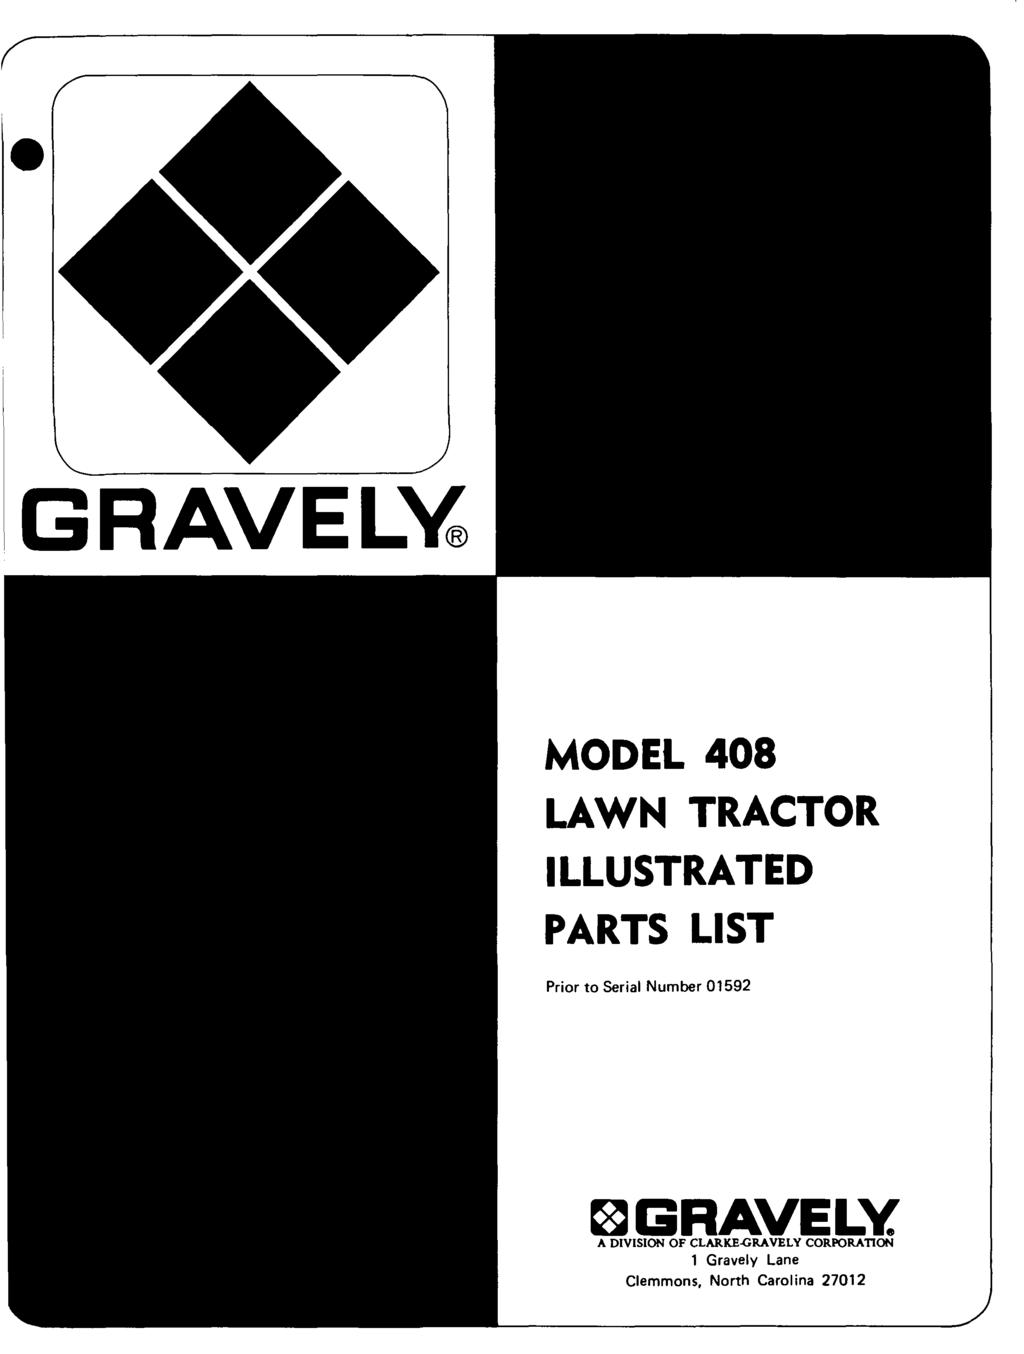 GRAVEL~ MODEL 408 LAWN TRACTOR ILLUSTRATED PARTS LIST Prior to Serial Number 01592